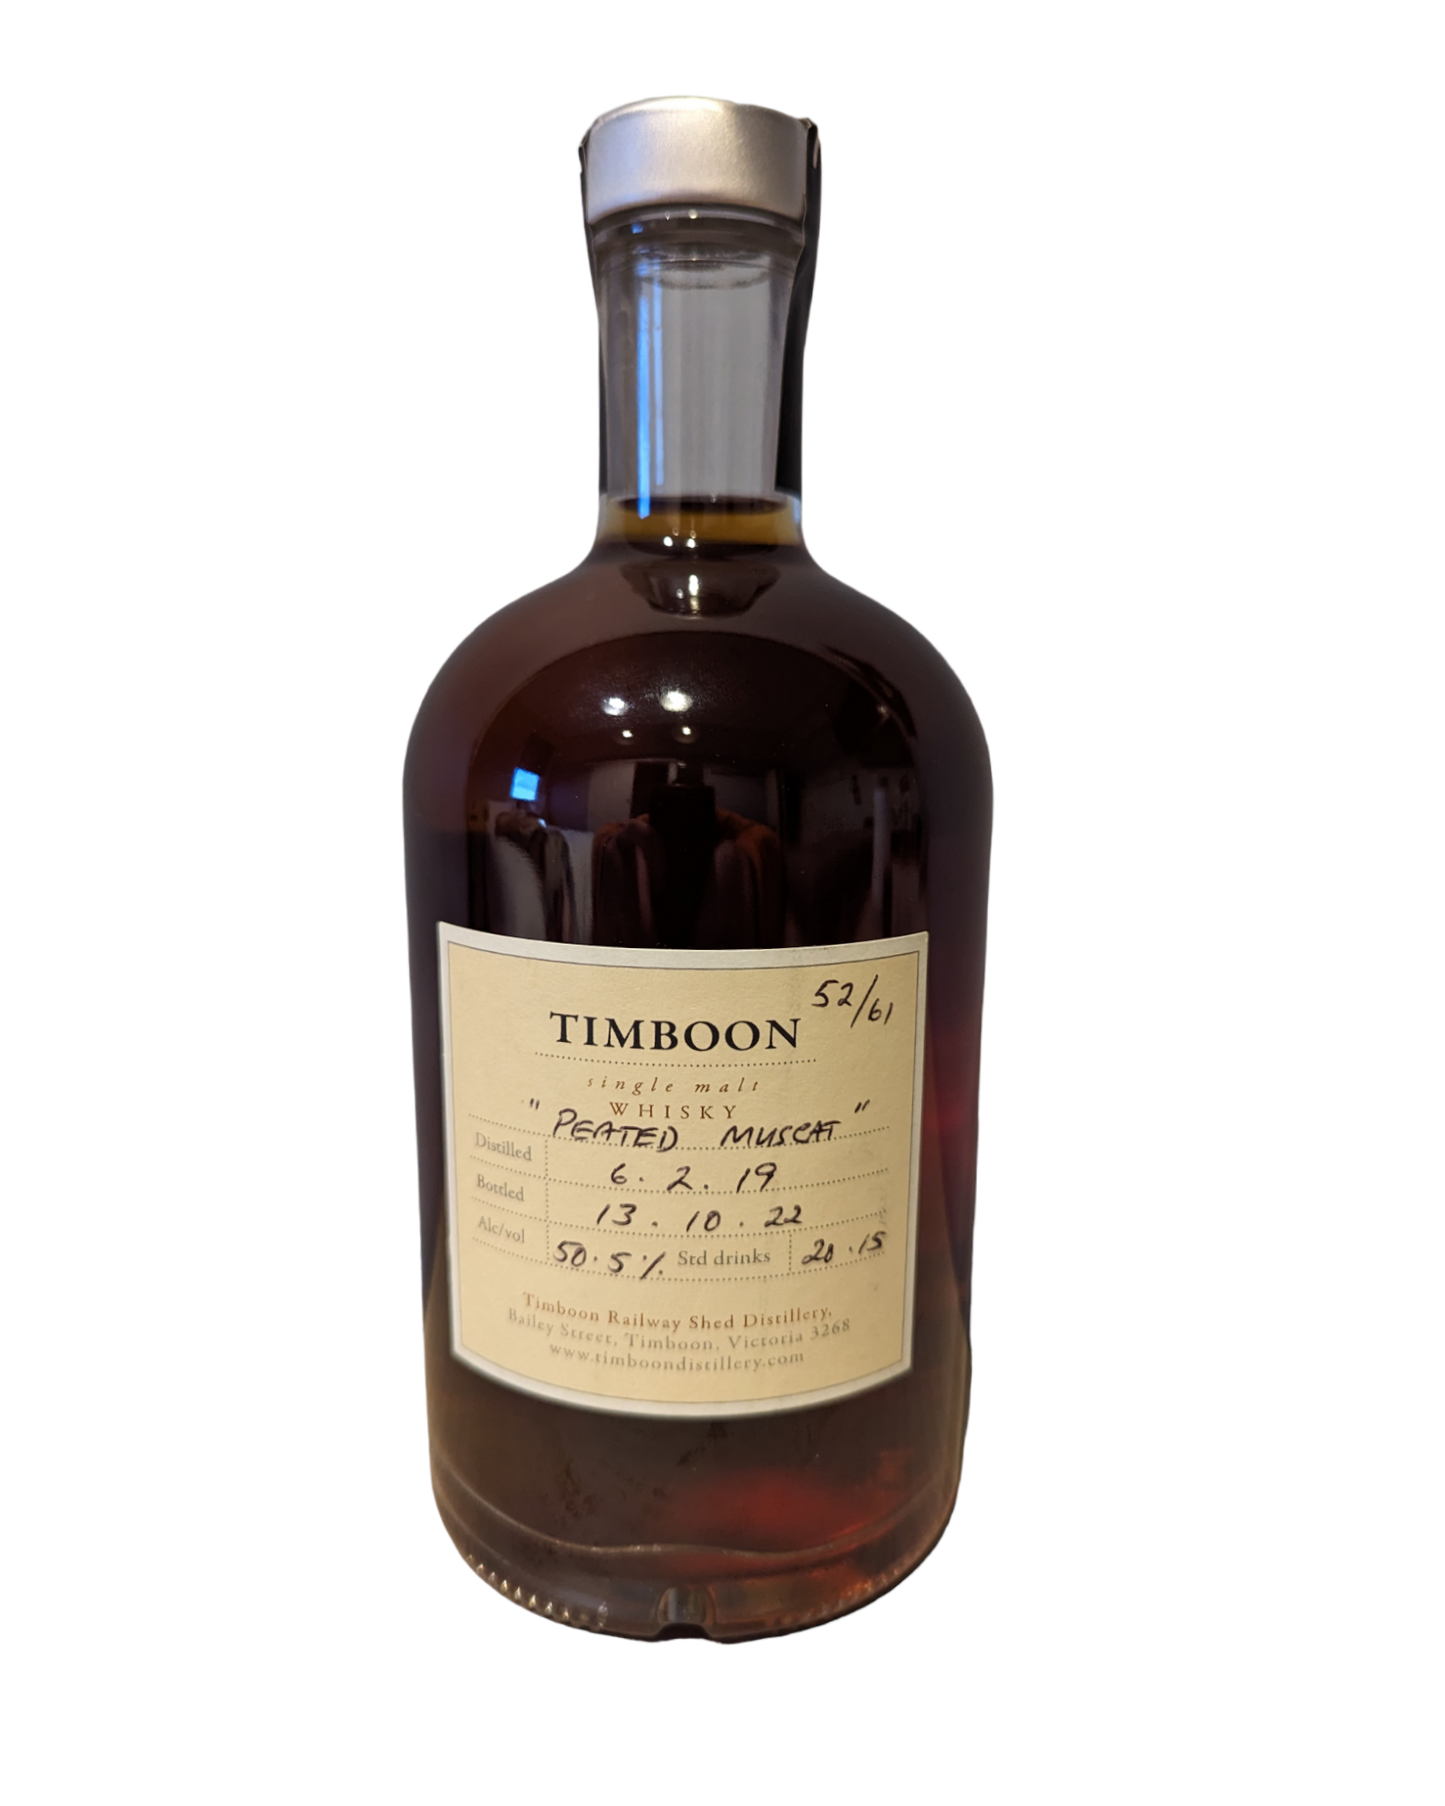 Timboon Railway Shed Distillery 'Peated Muscat Cask' Various Size Samples